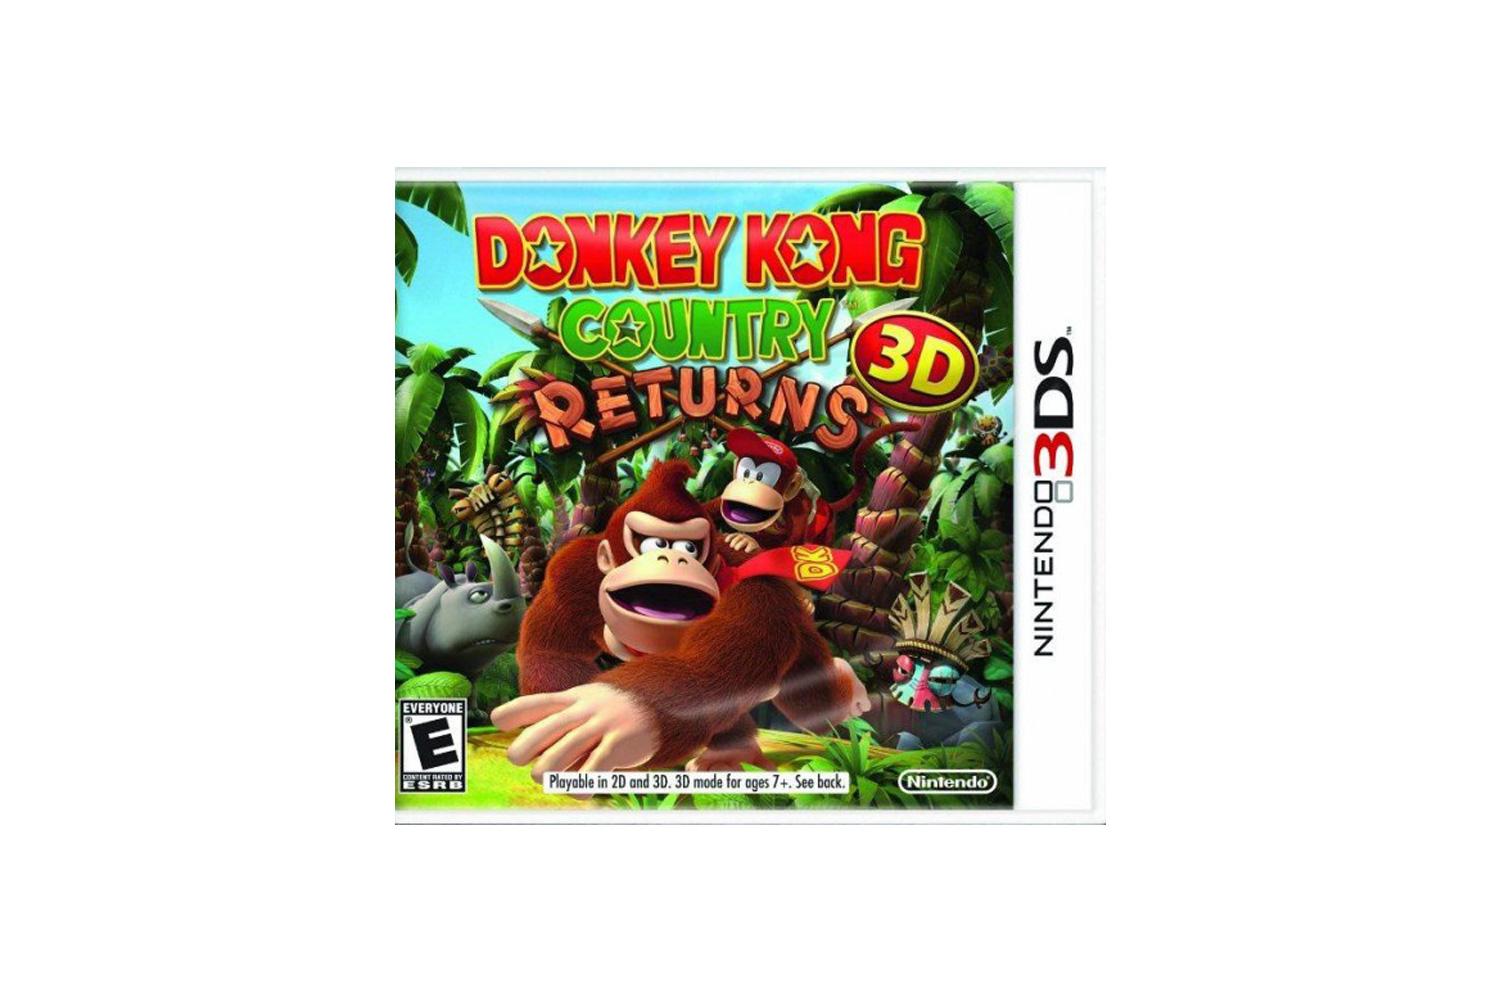 Oxide lineær Literacy Donkey Kong Country Returns 3D Review | Digital Trends